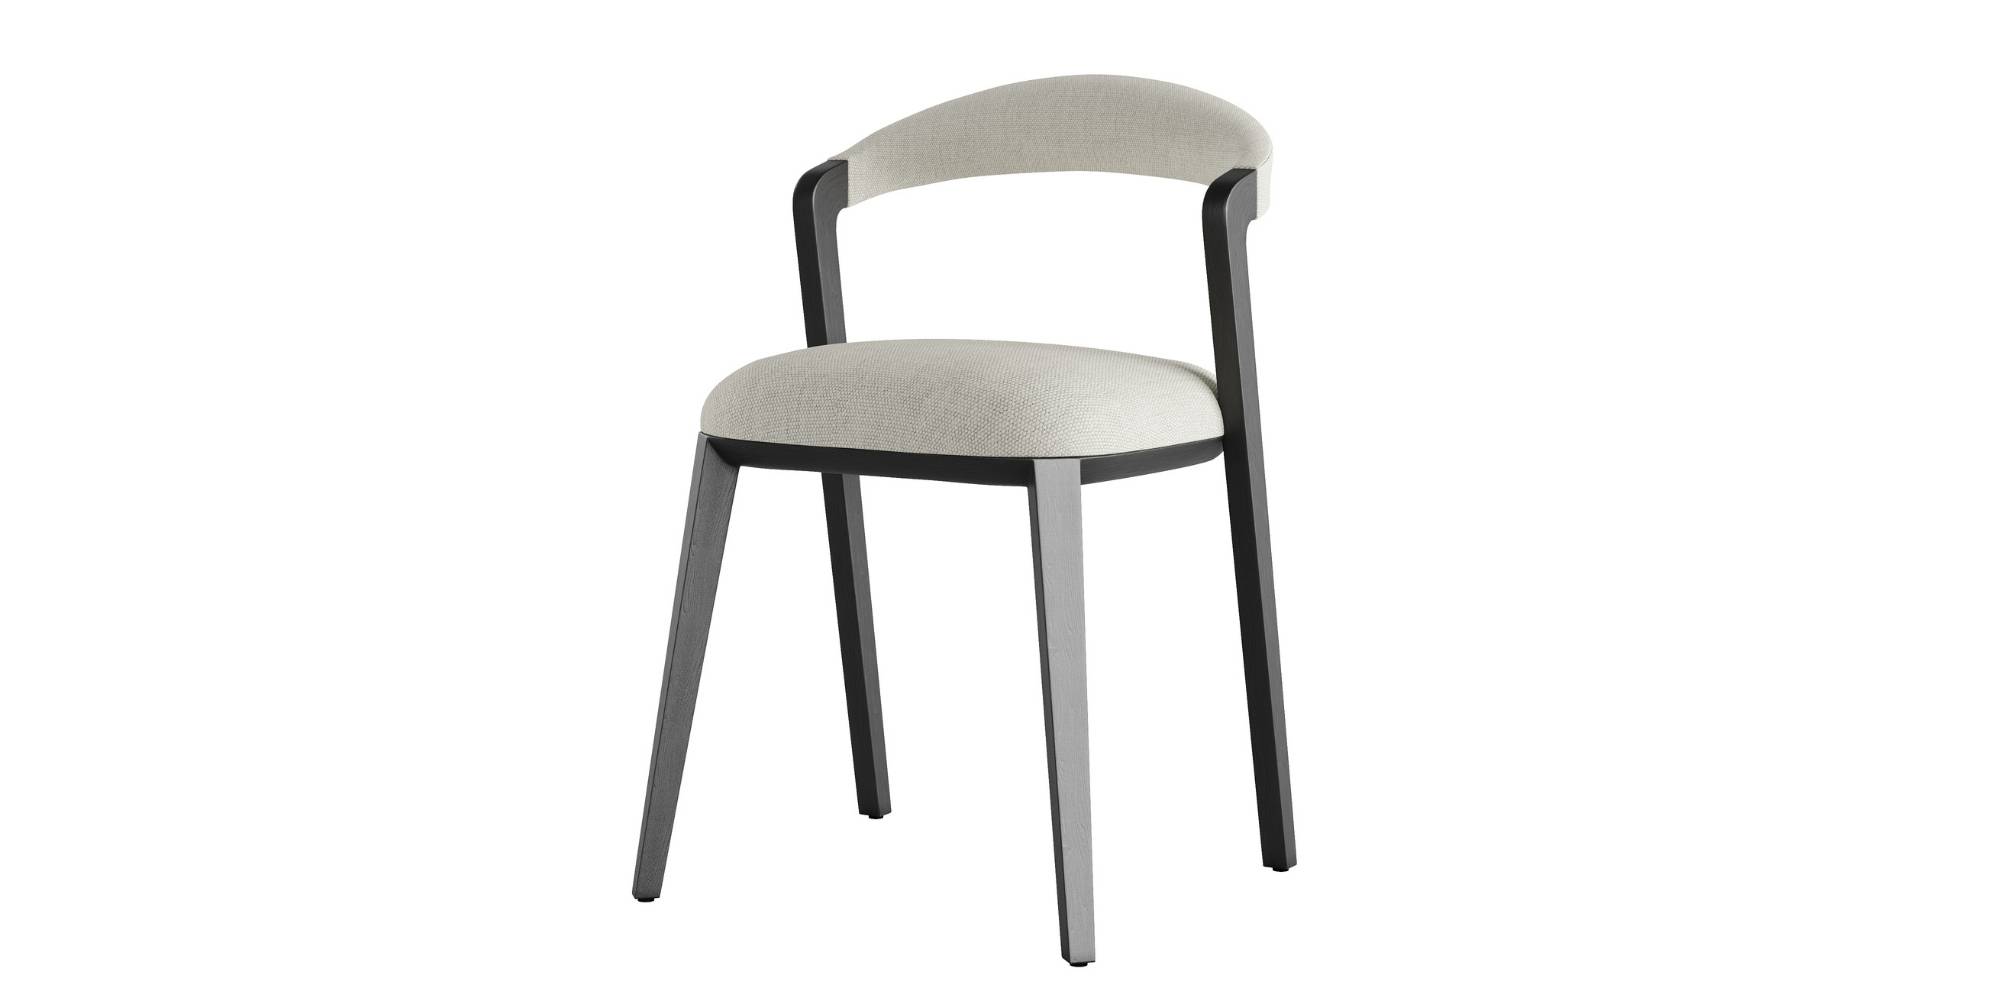 Tamarindo Dining Chair in Outdoor Dining Chairs for Tamarindo collection